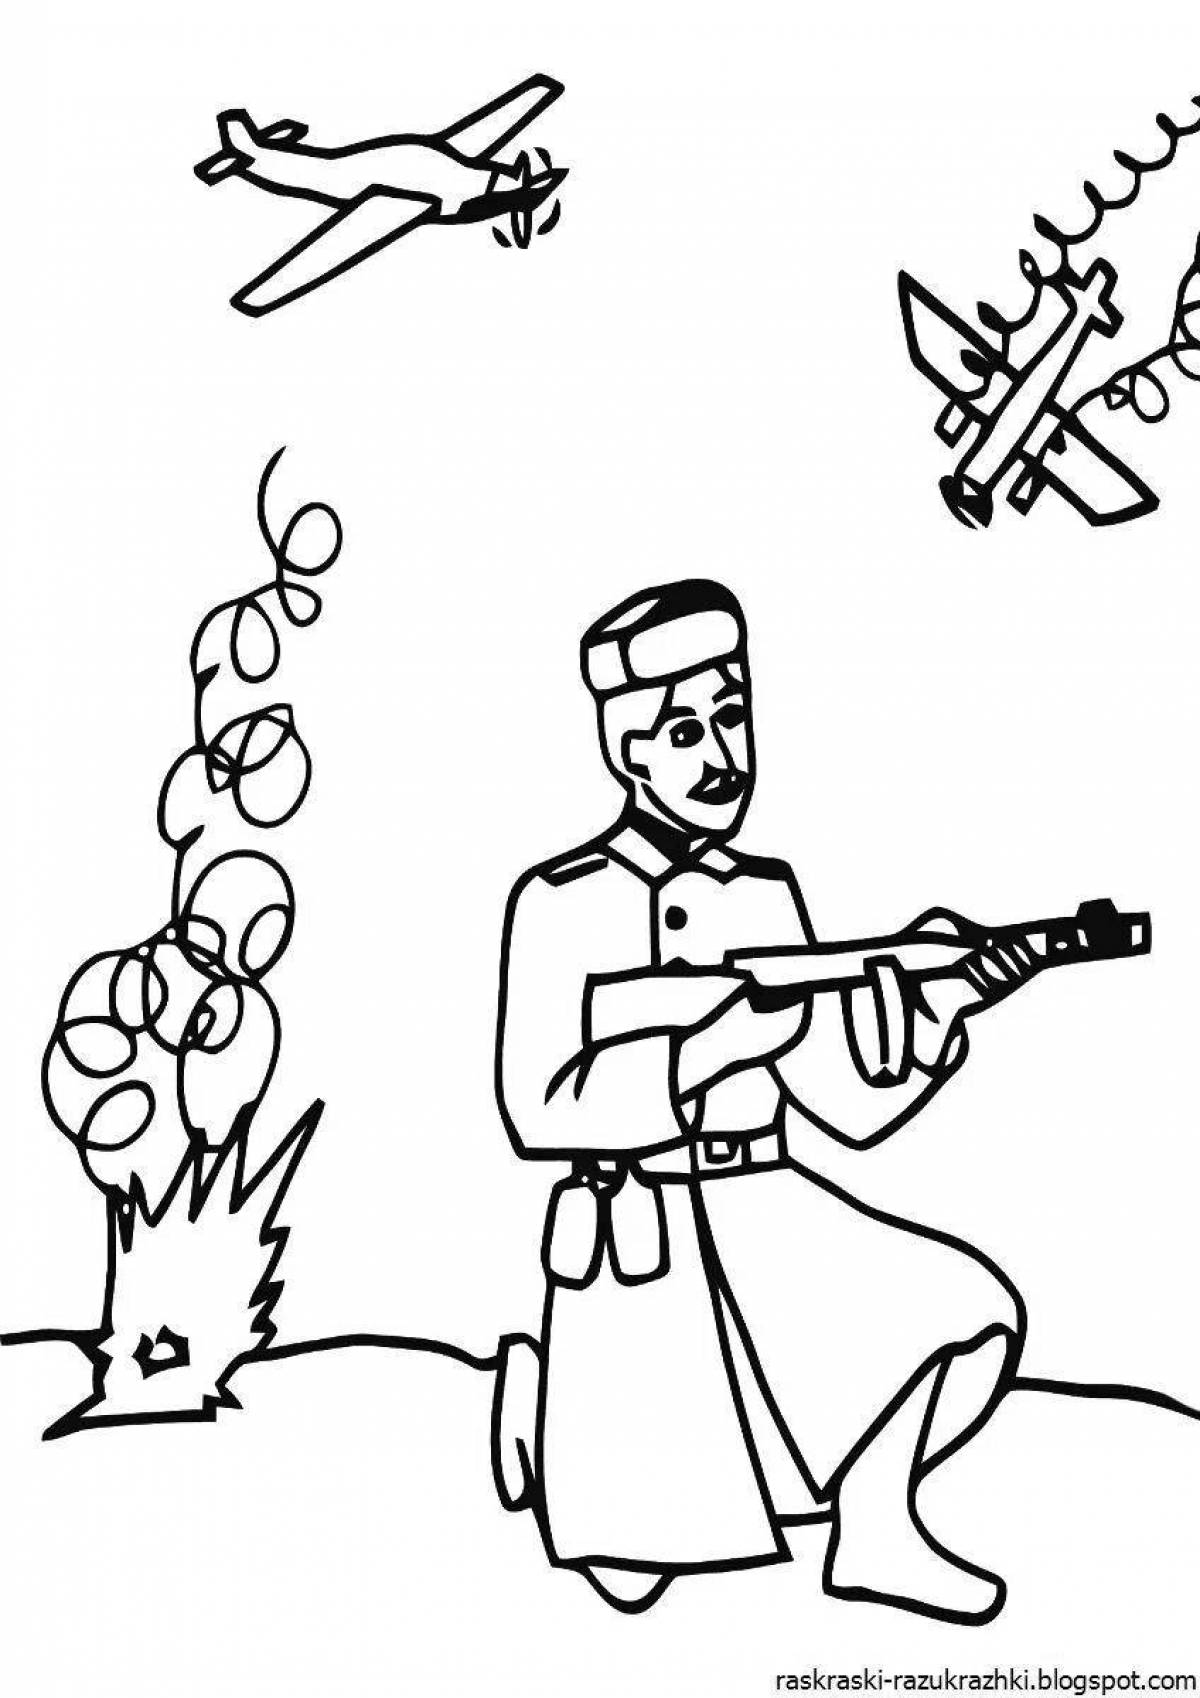 Radiant coloring page for children war 1941-1945